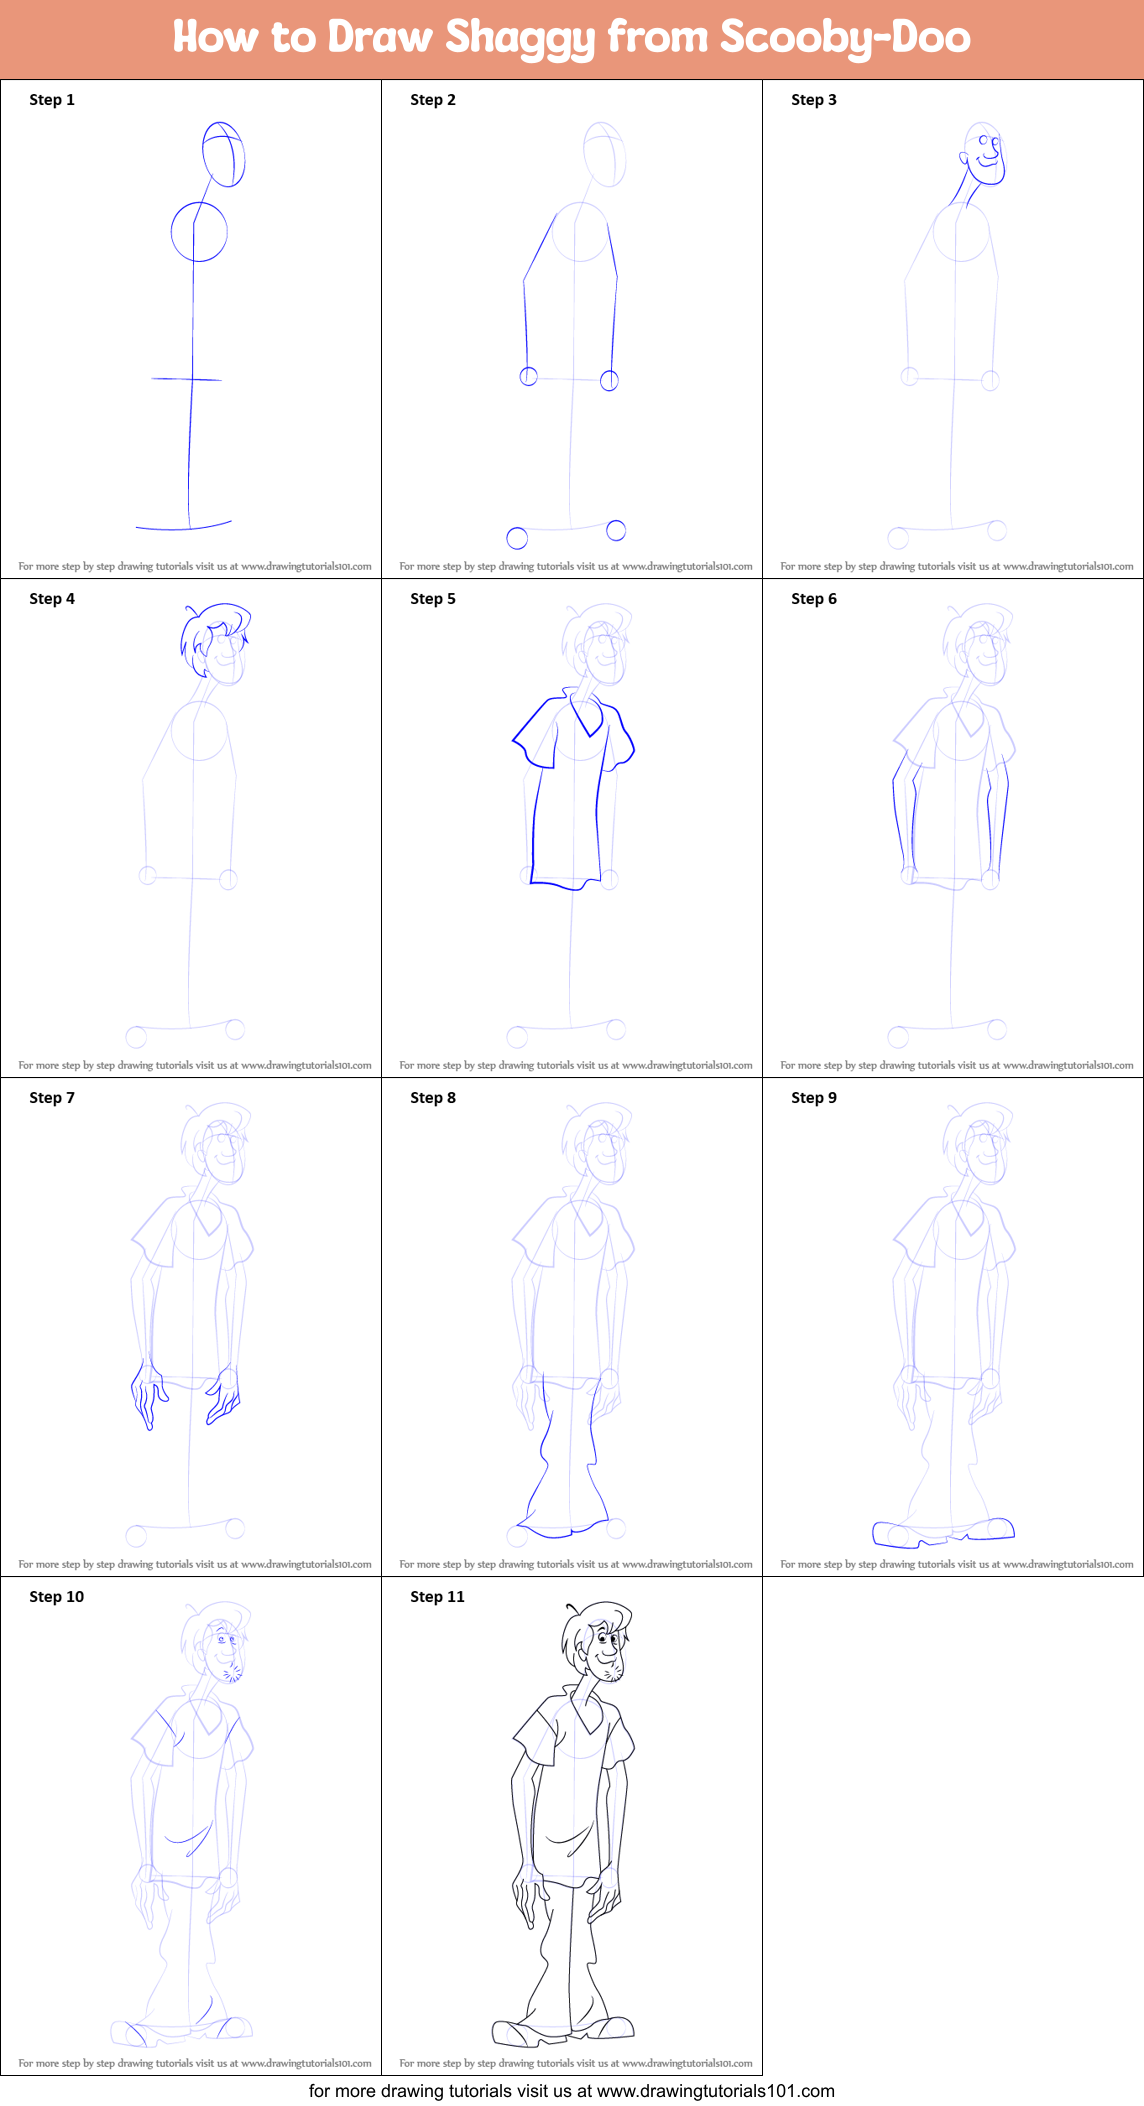 How to Draw Shaggy from ScoobyDoo printable step by step drawing sheet